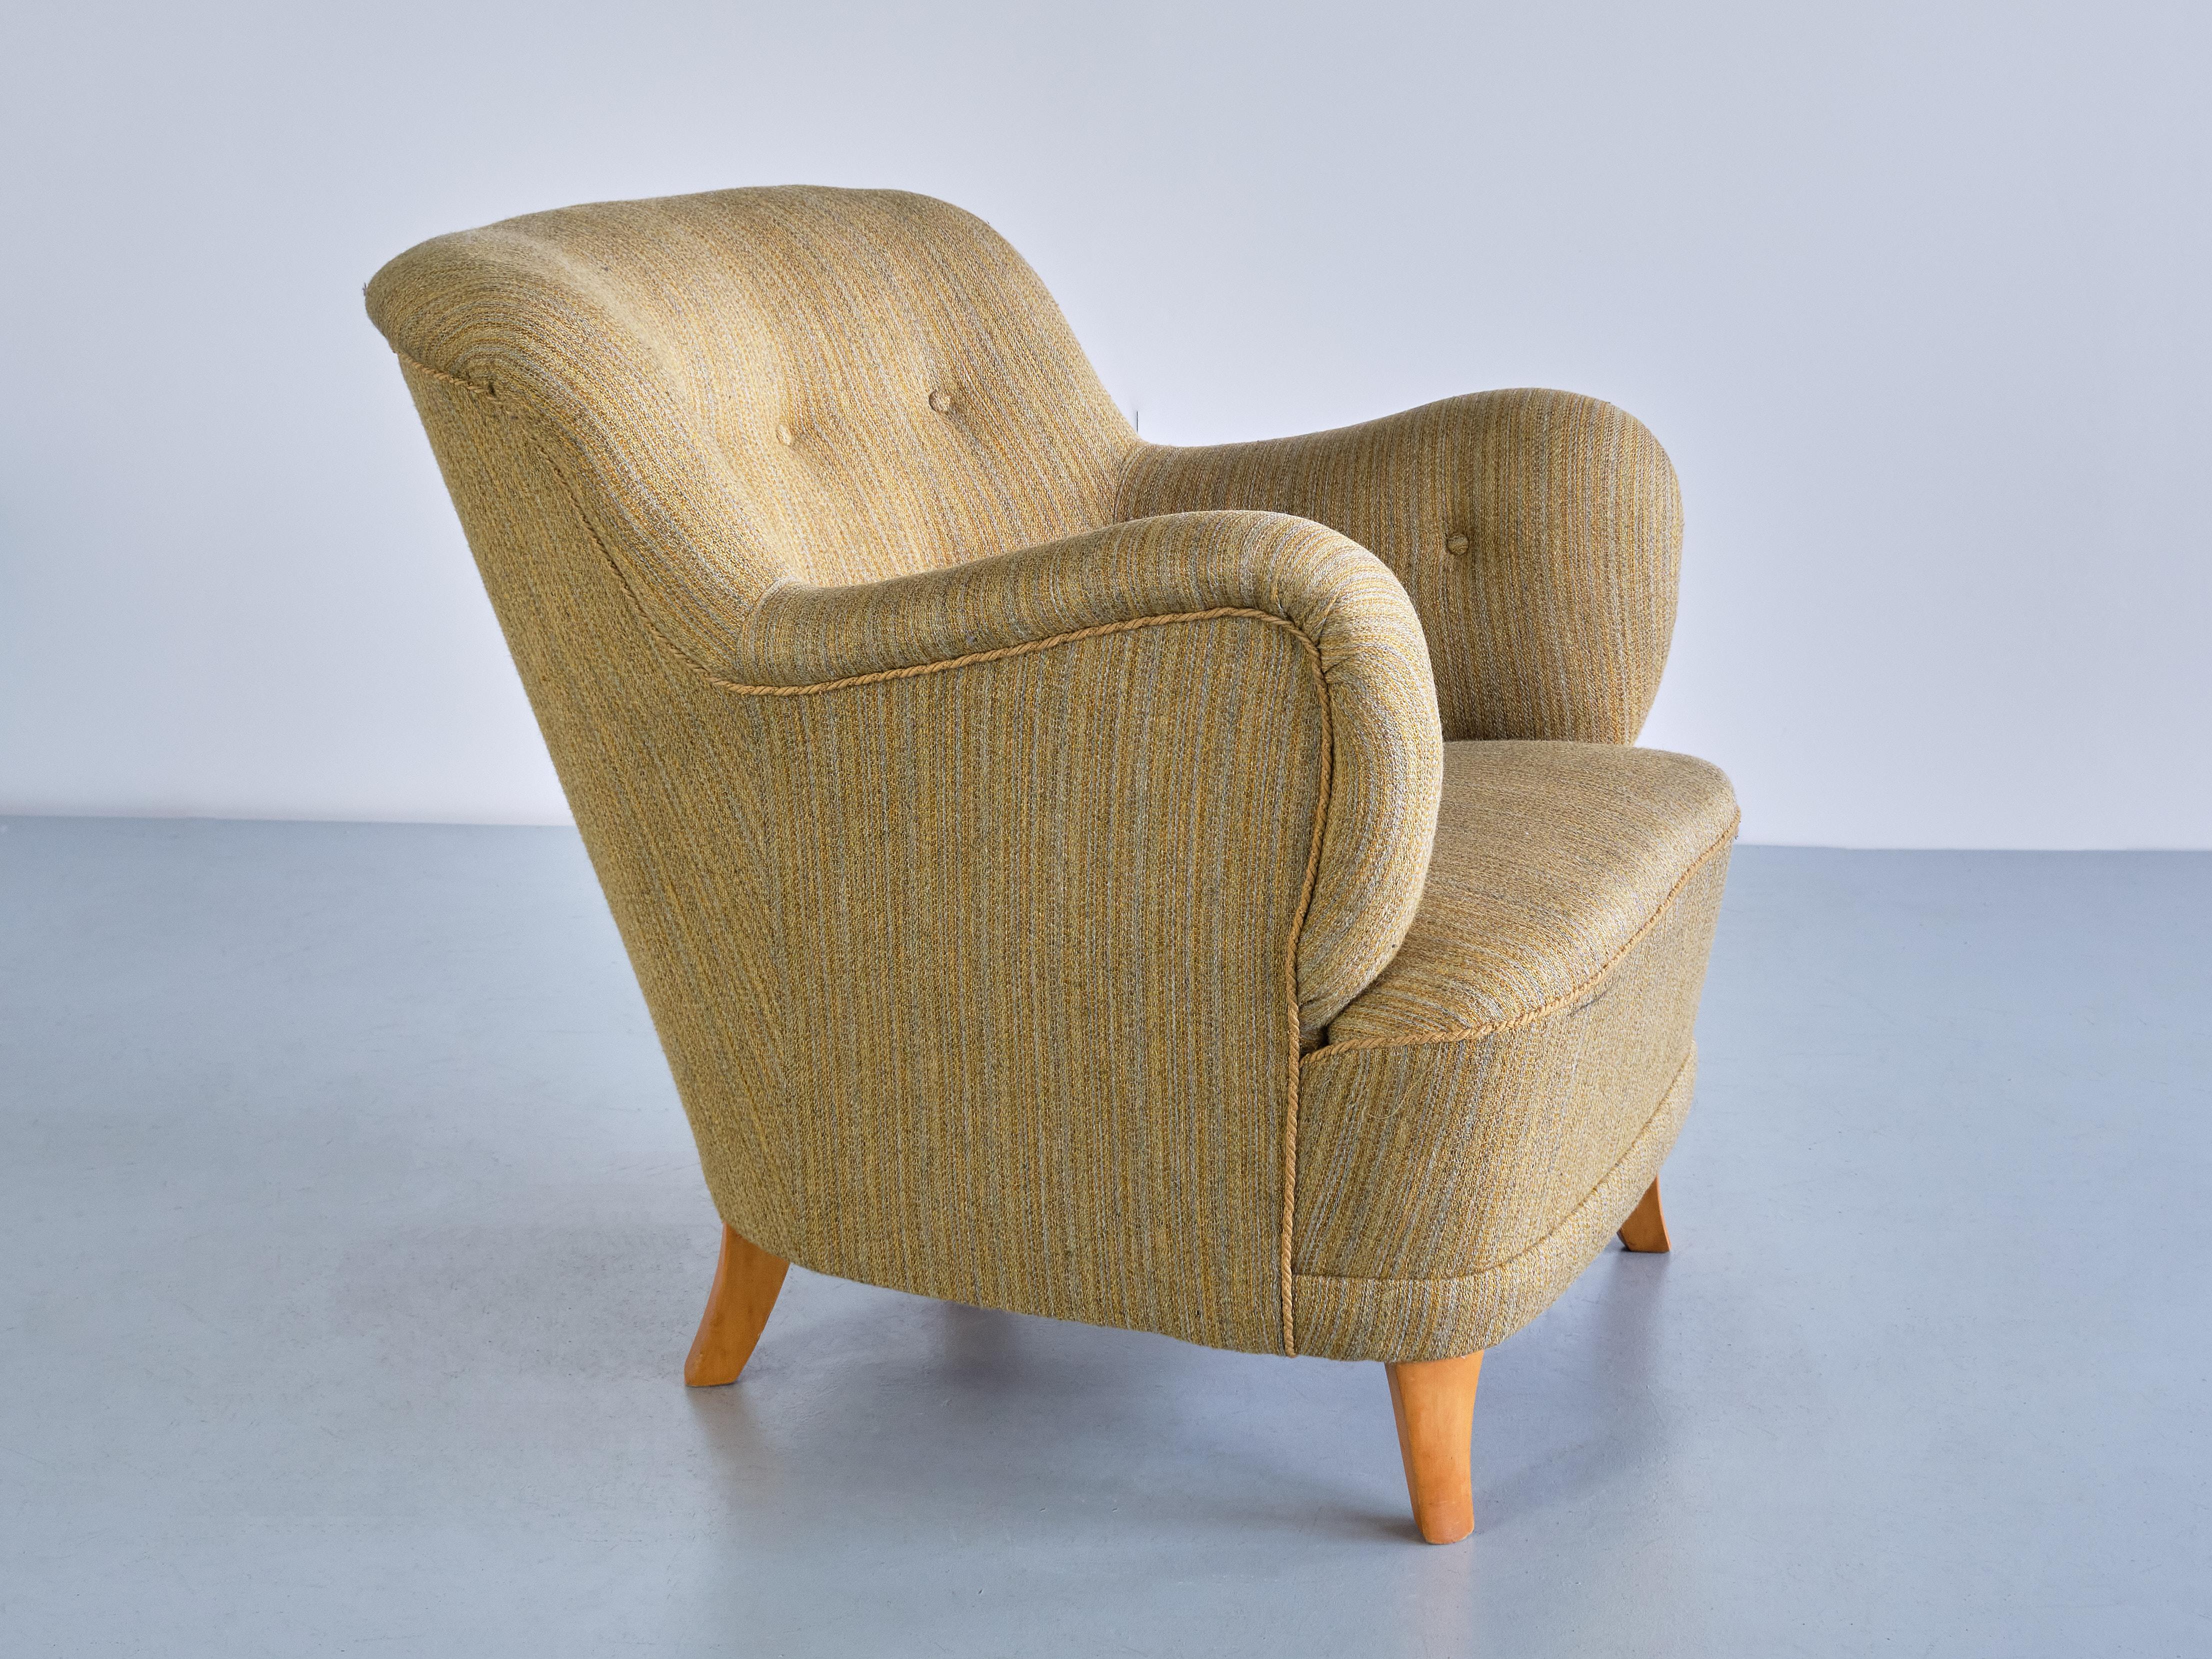 Fabric Sculptural Pair of Gustav Axel Berg Armchairs in Beech and Wool, Sweden, 1940s For Sale